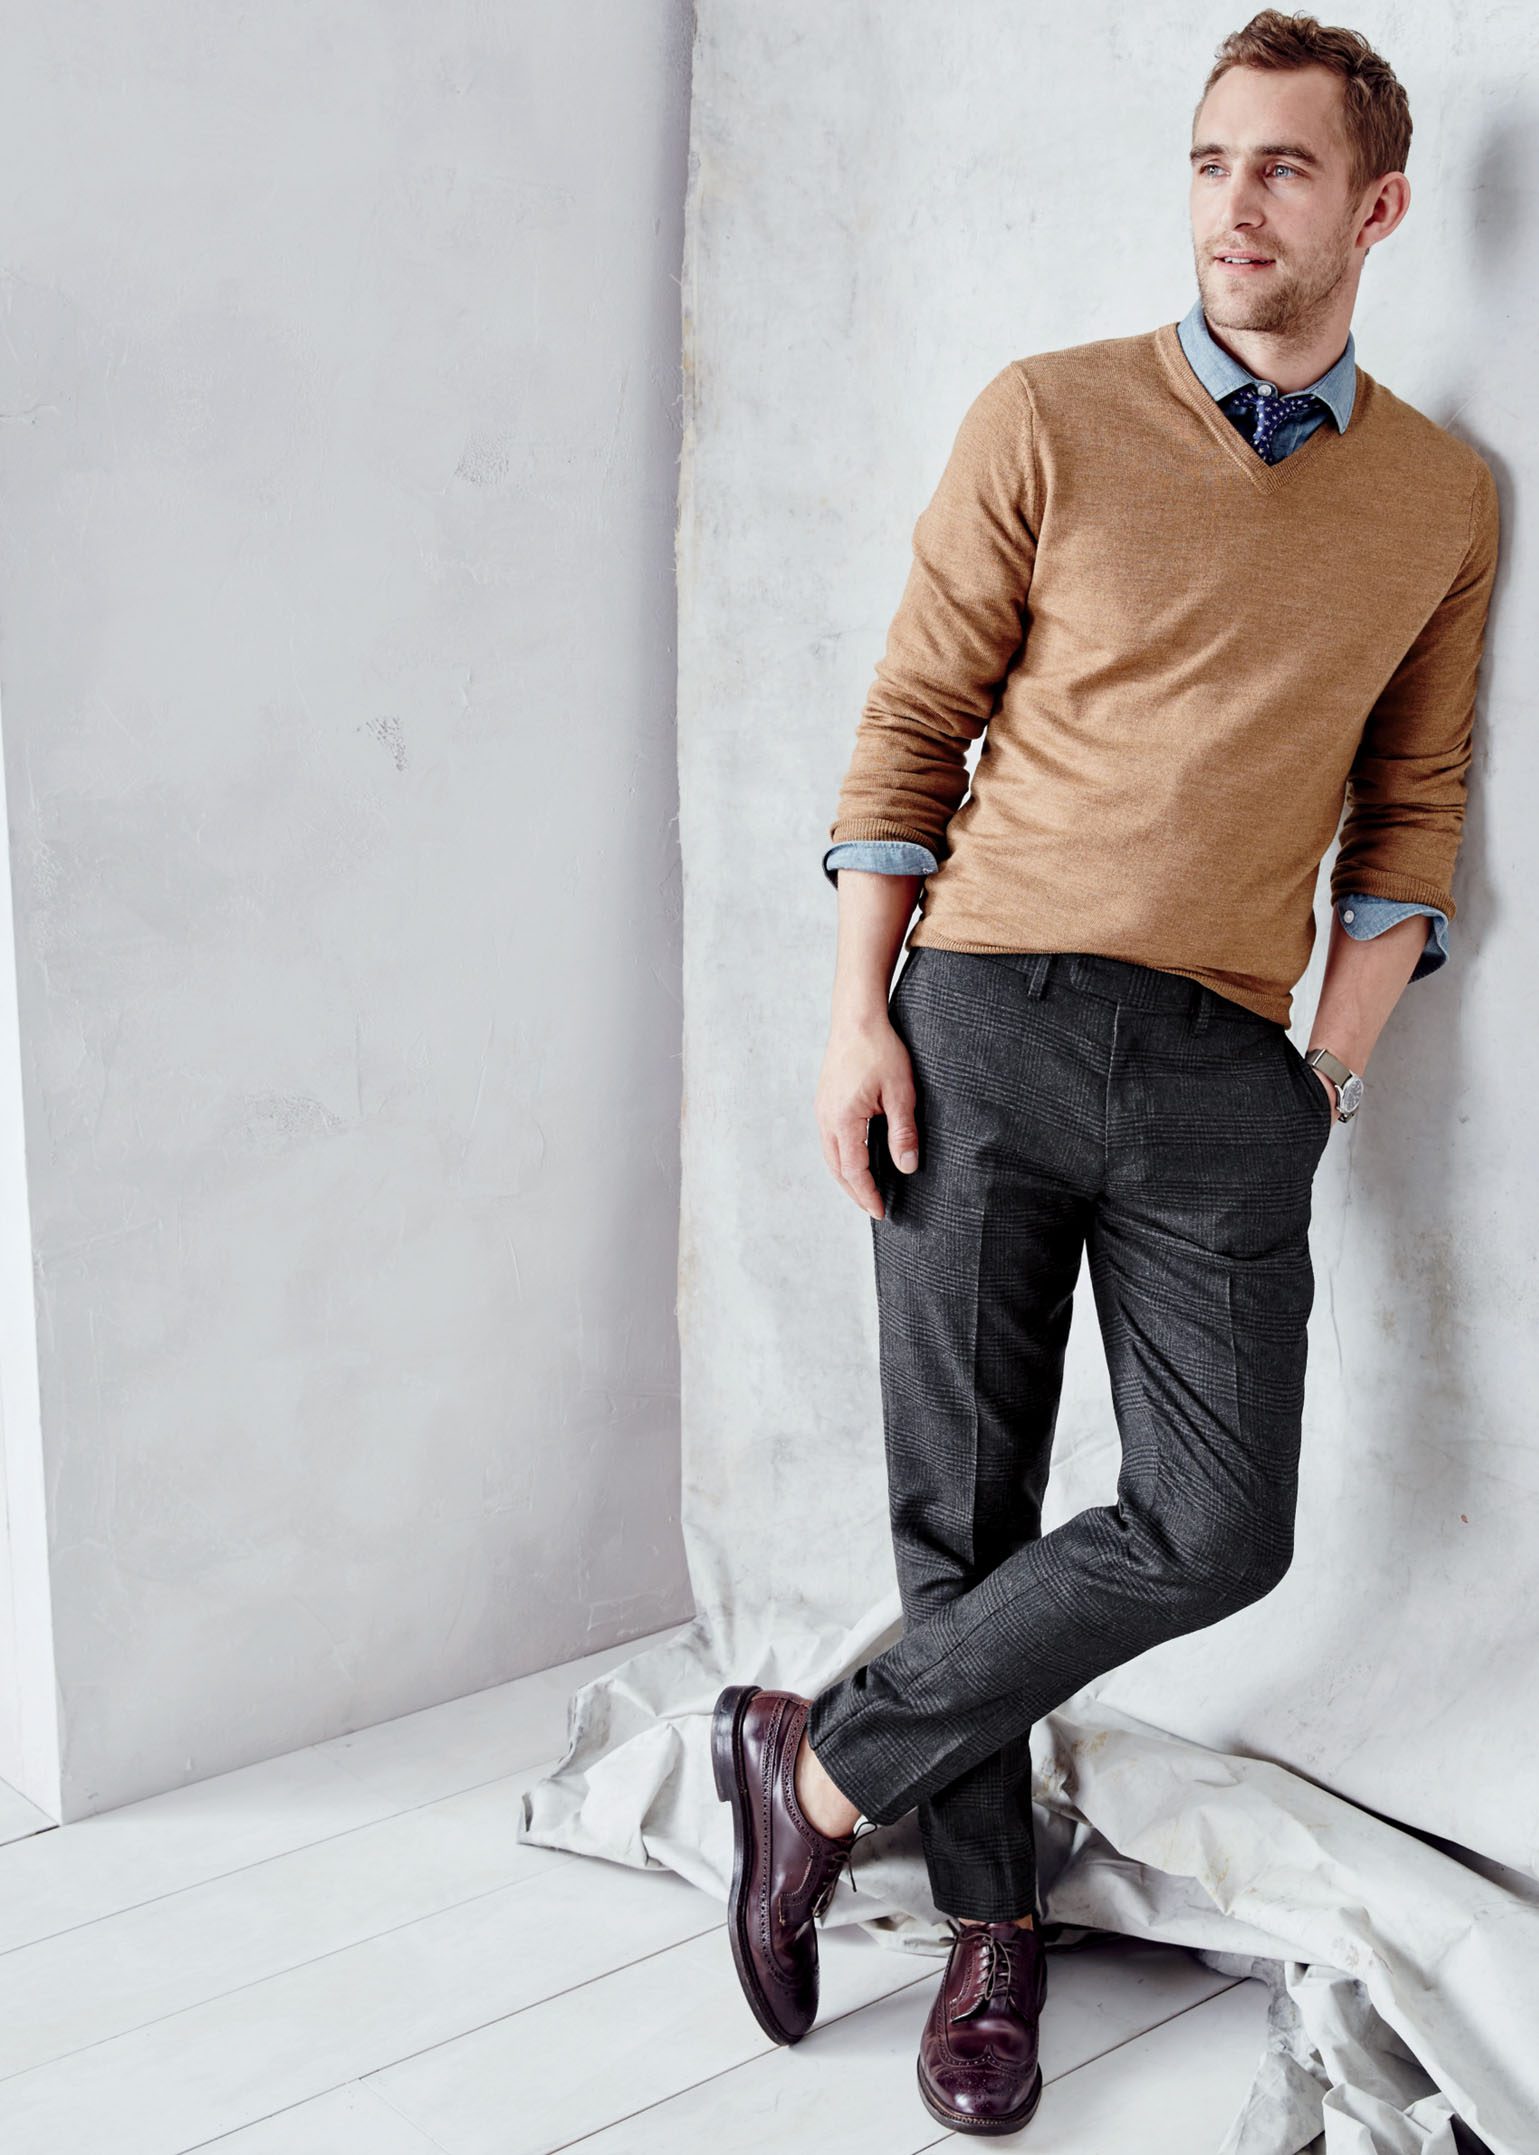 Man wearing a brown J. Crew v-neck sweater